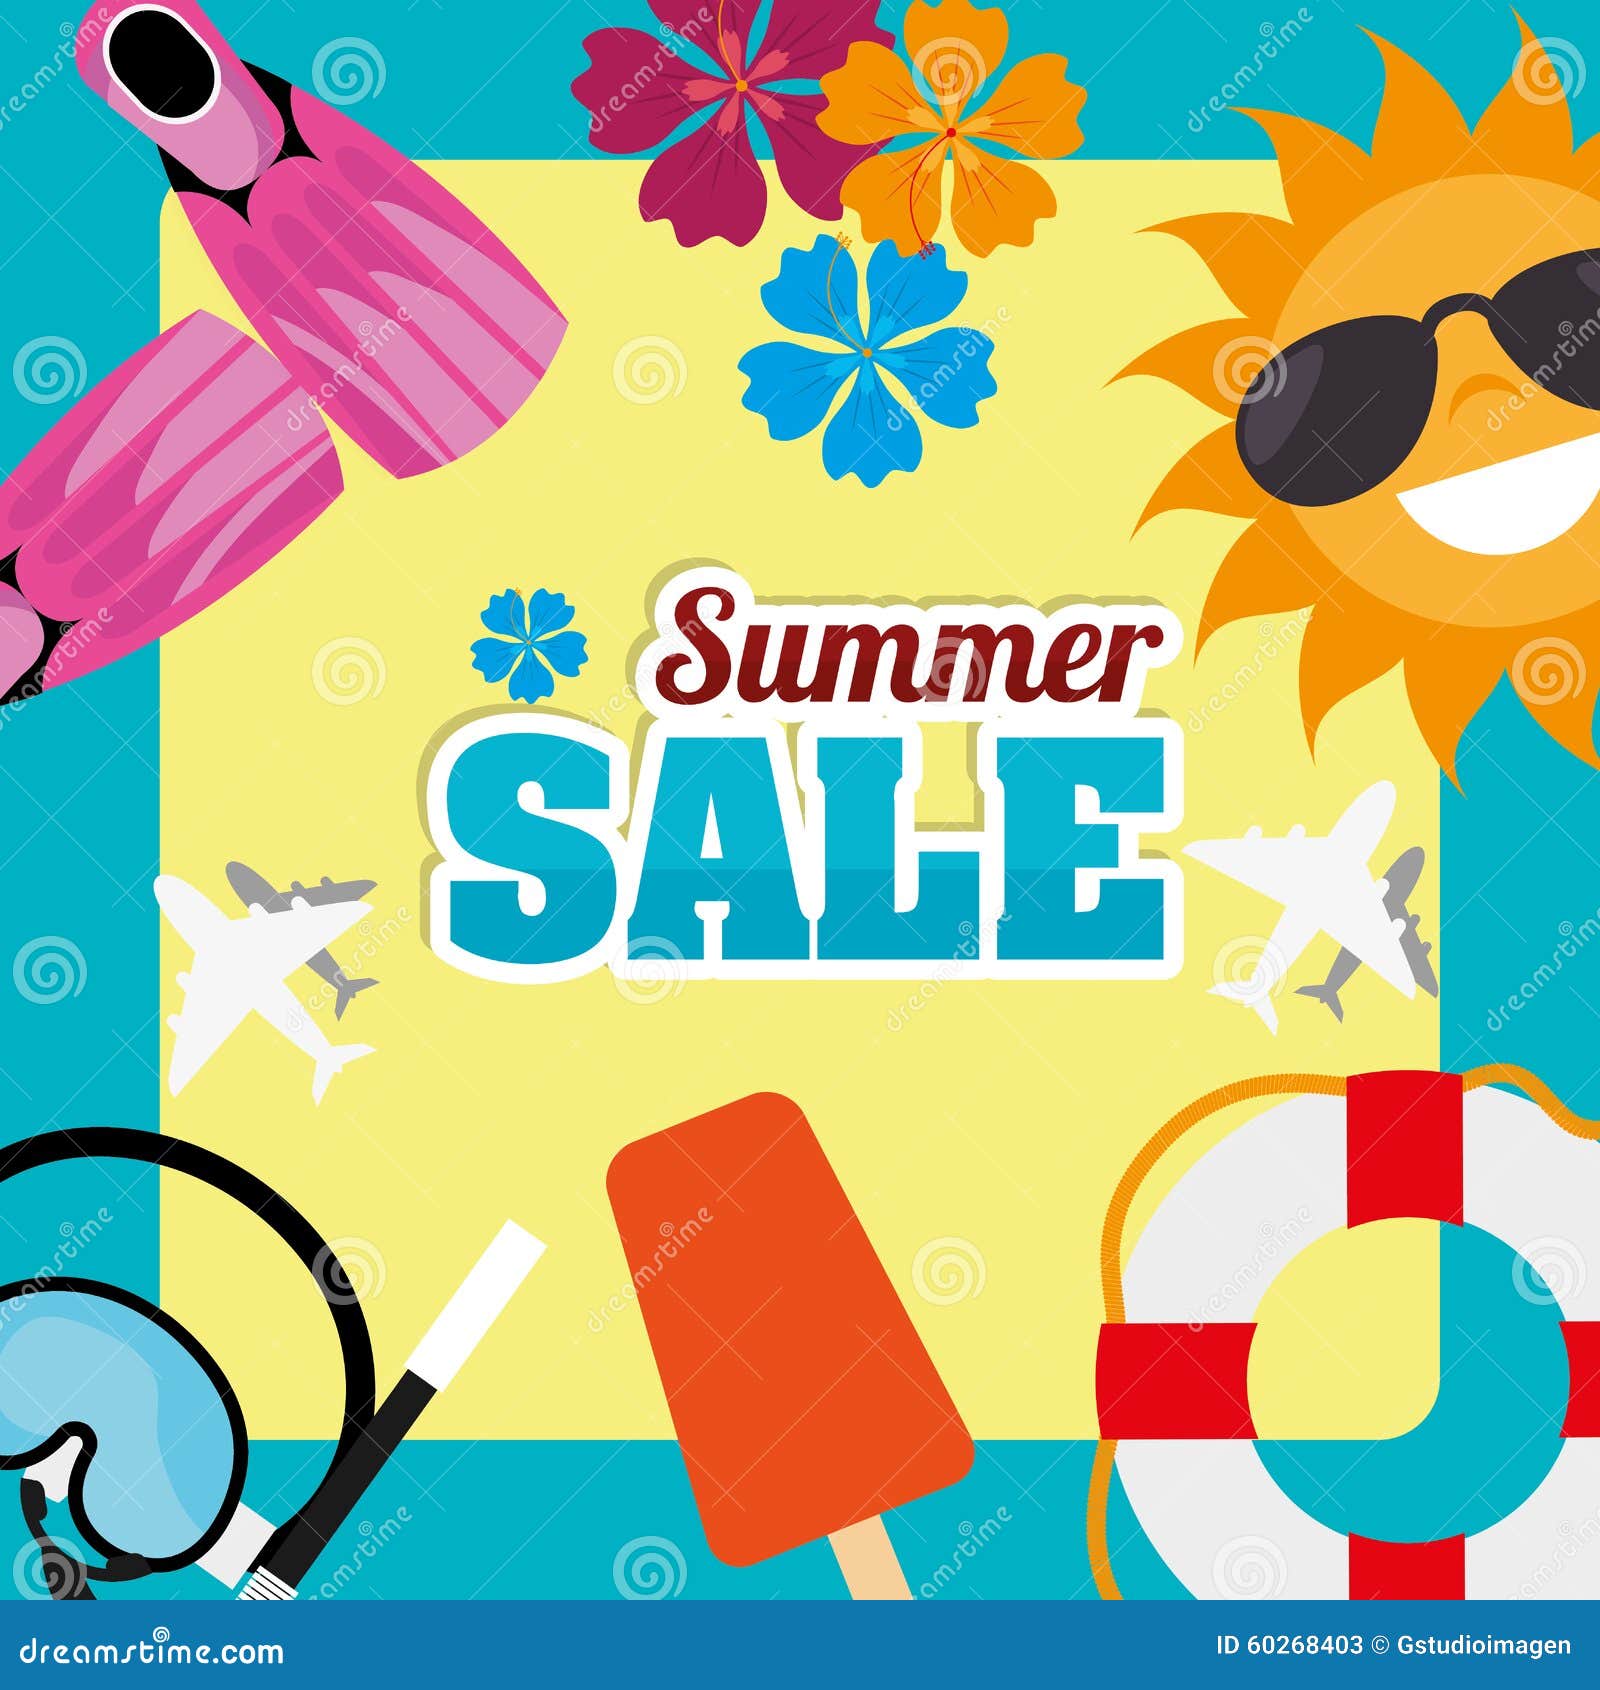 free clipart summer sale - photo #36